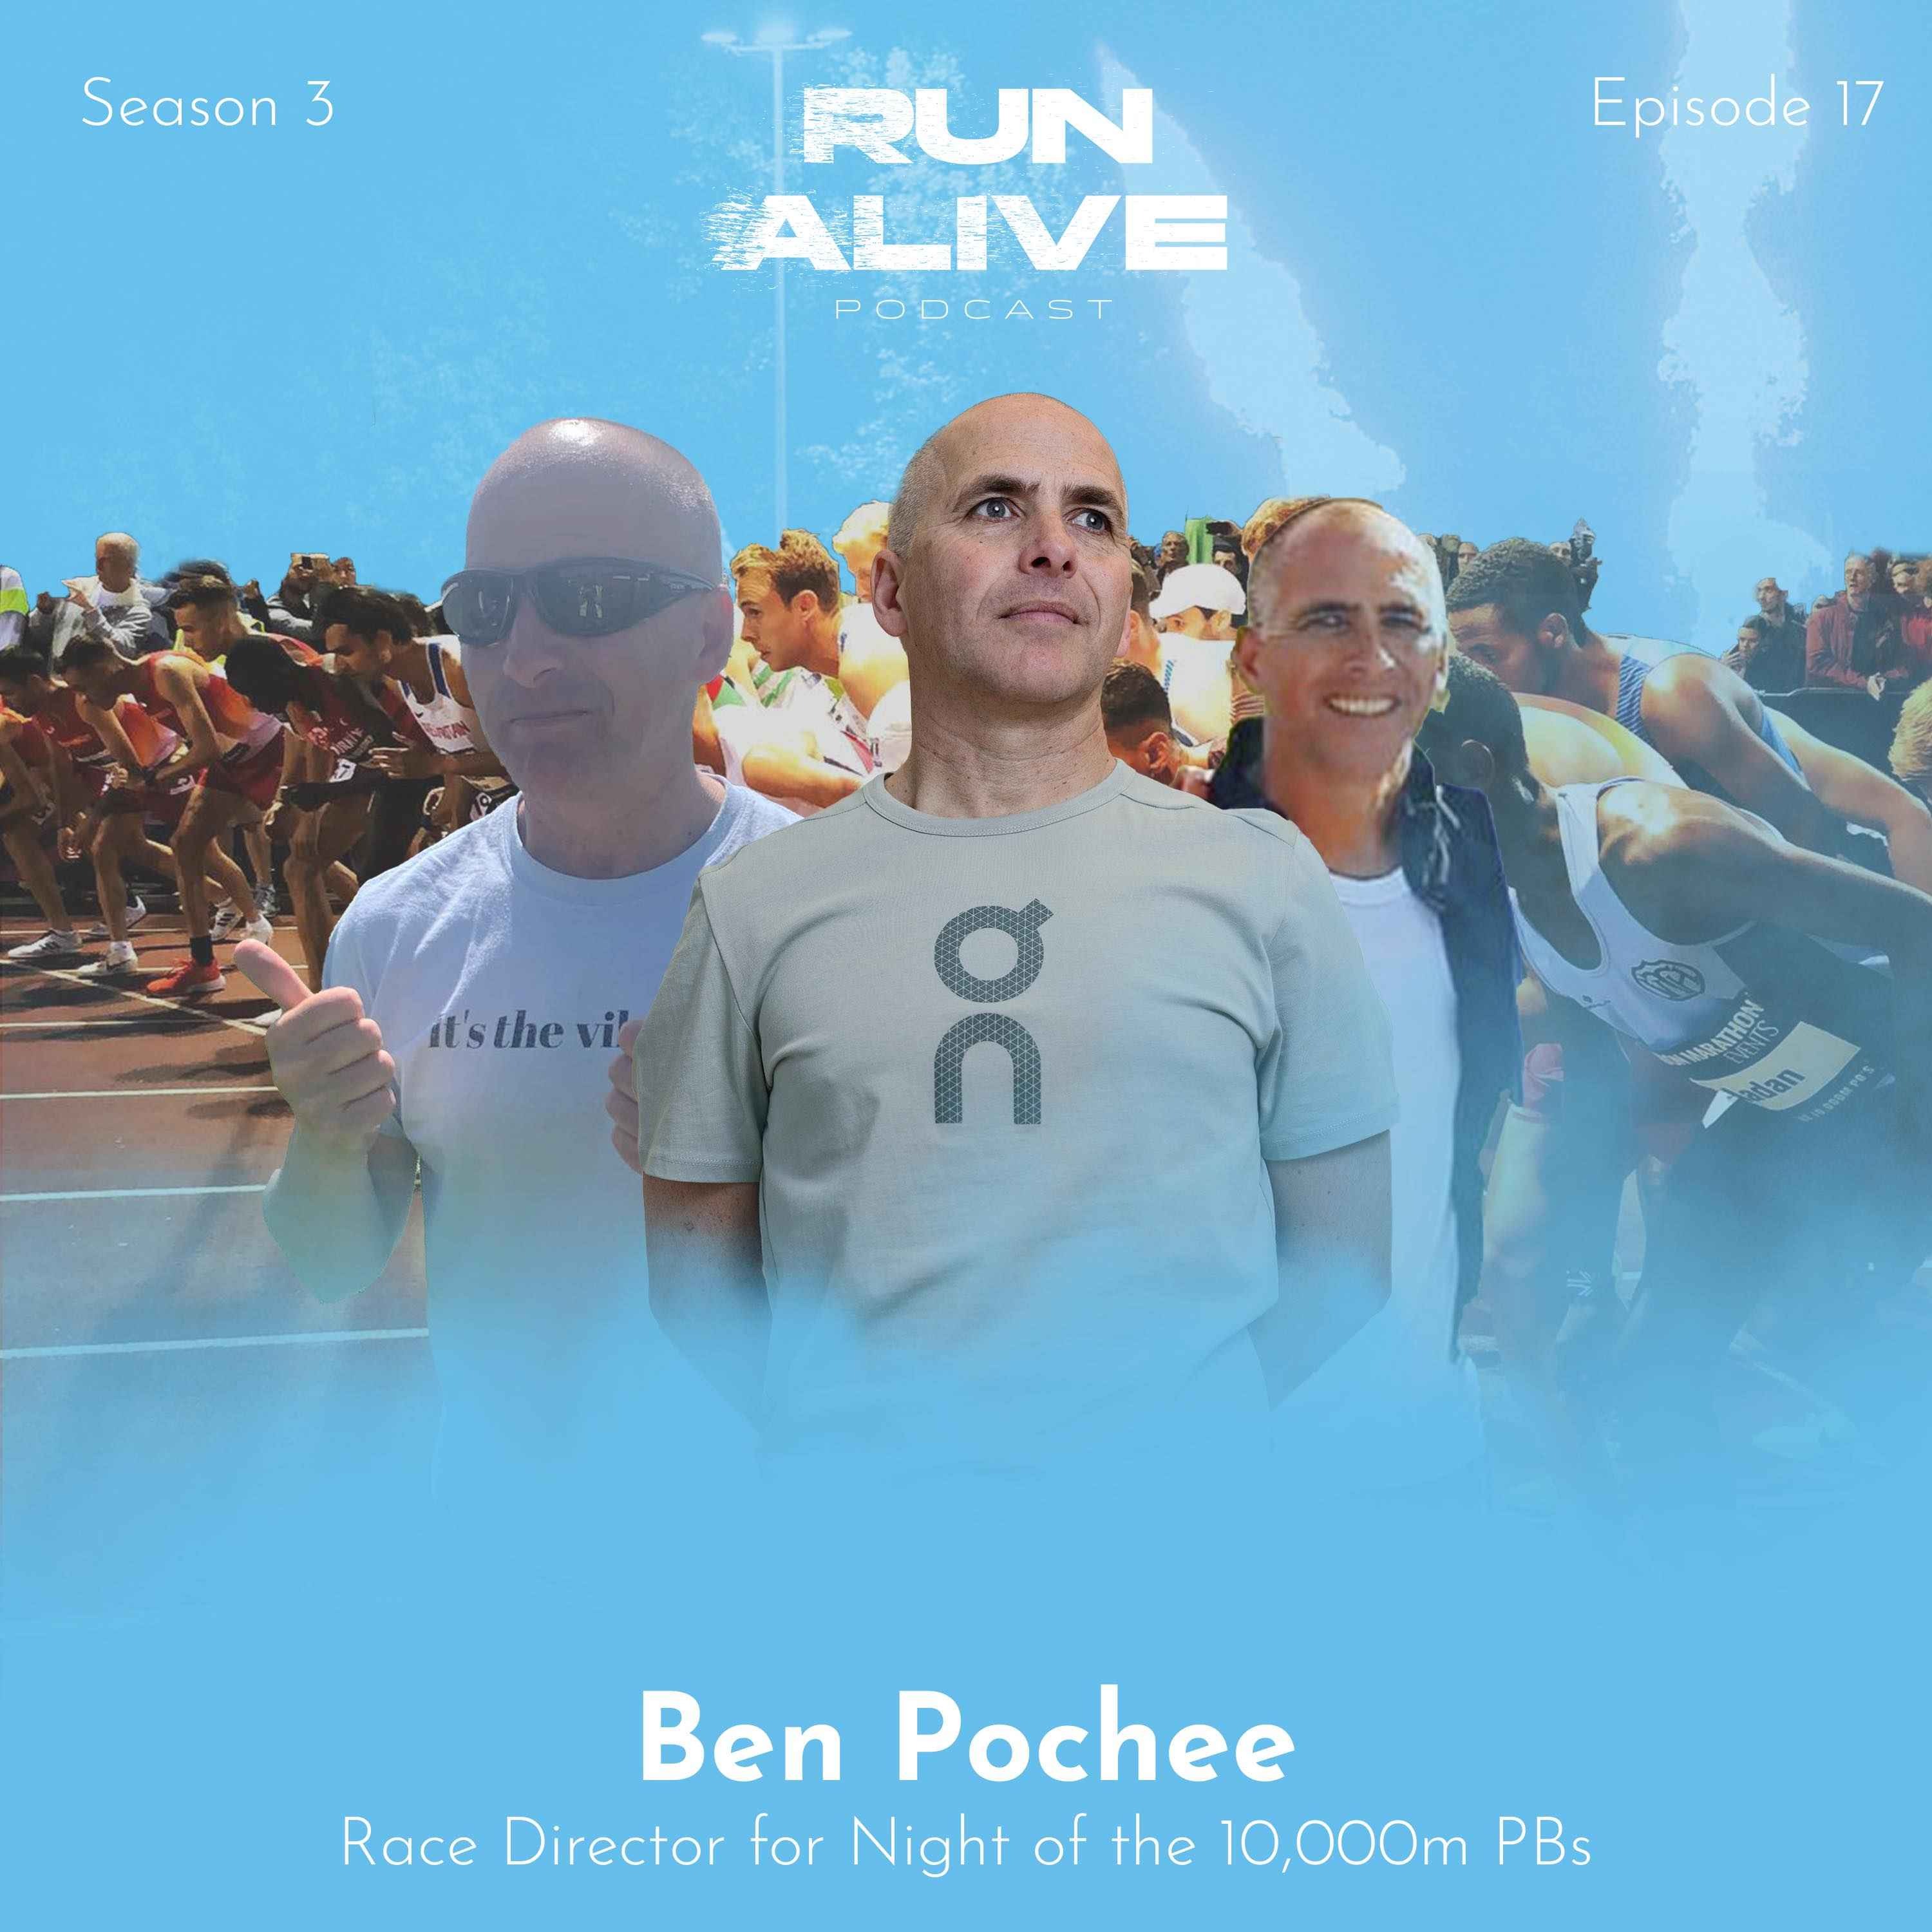 Bringing the track to life: Ben Pochee and the Night of the 10k PBs